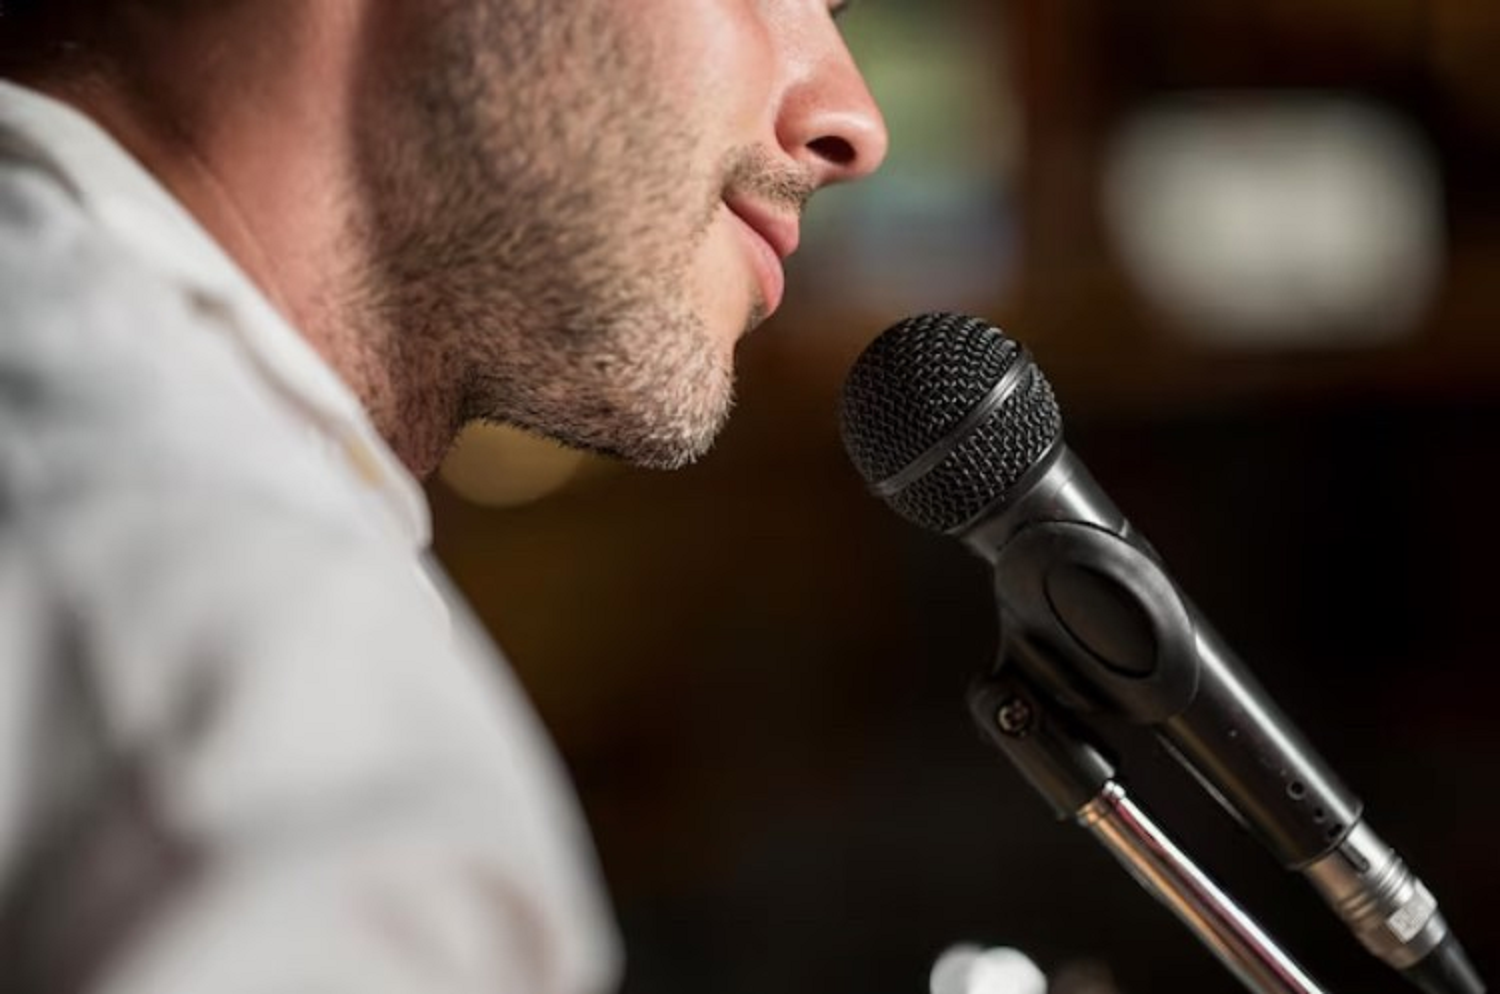 Closeup photo of a man speaking at a mic, zoomed in on the bottom half his face and the mic